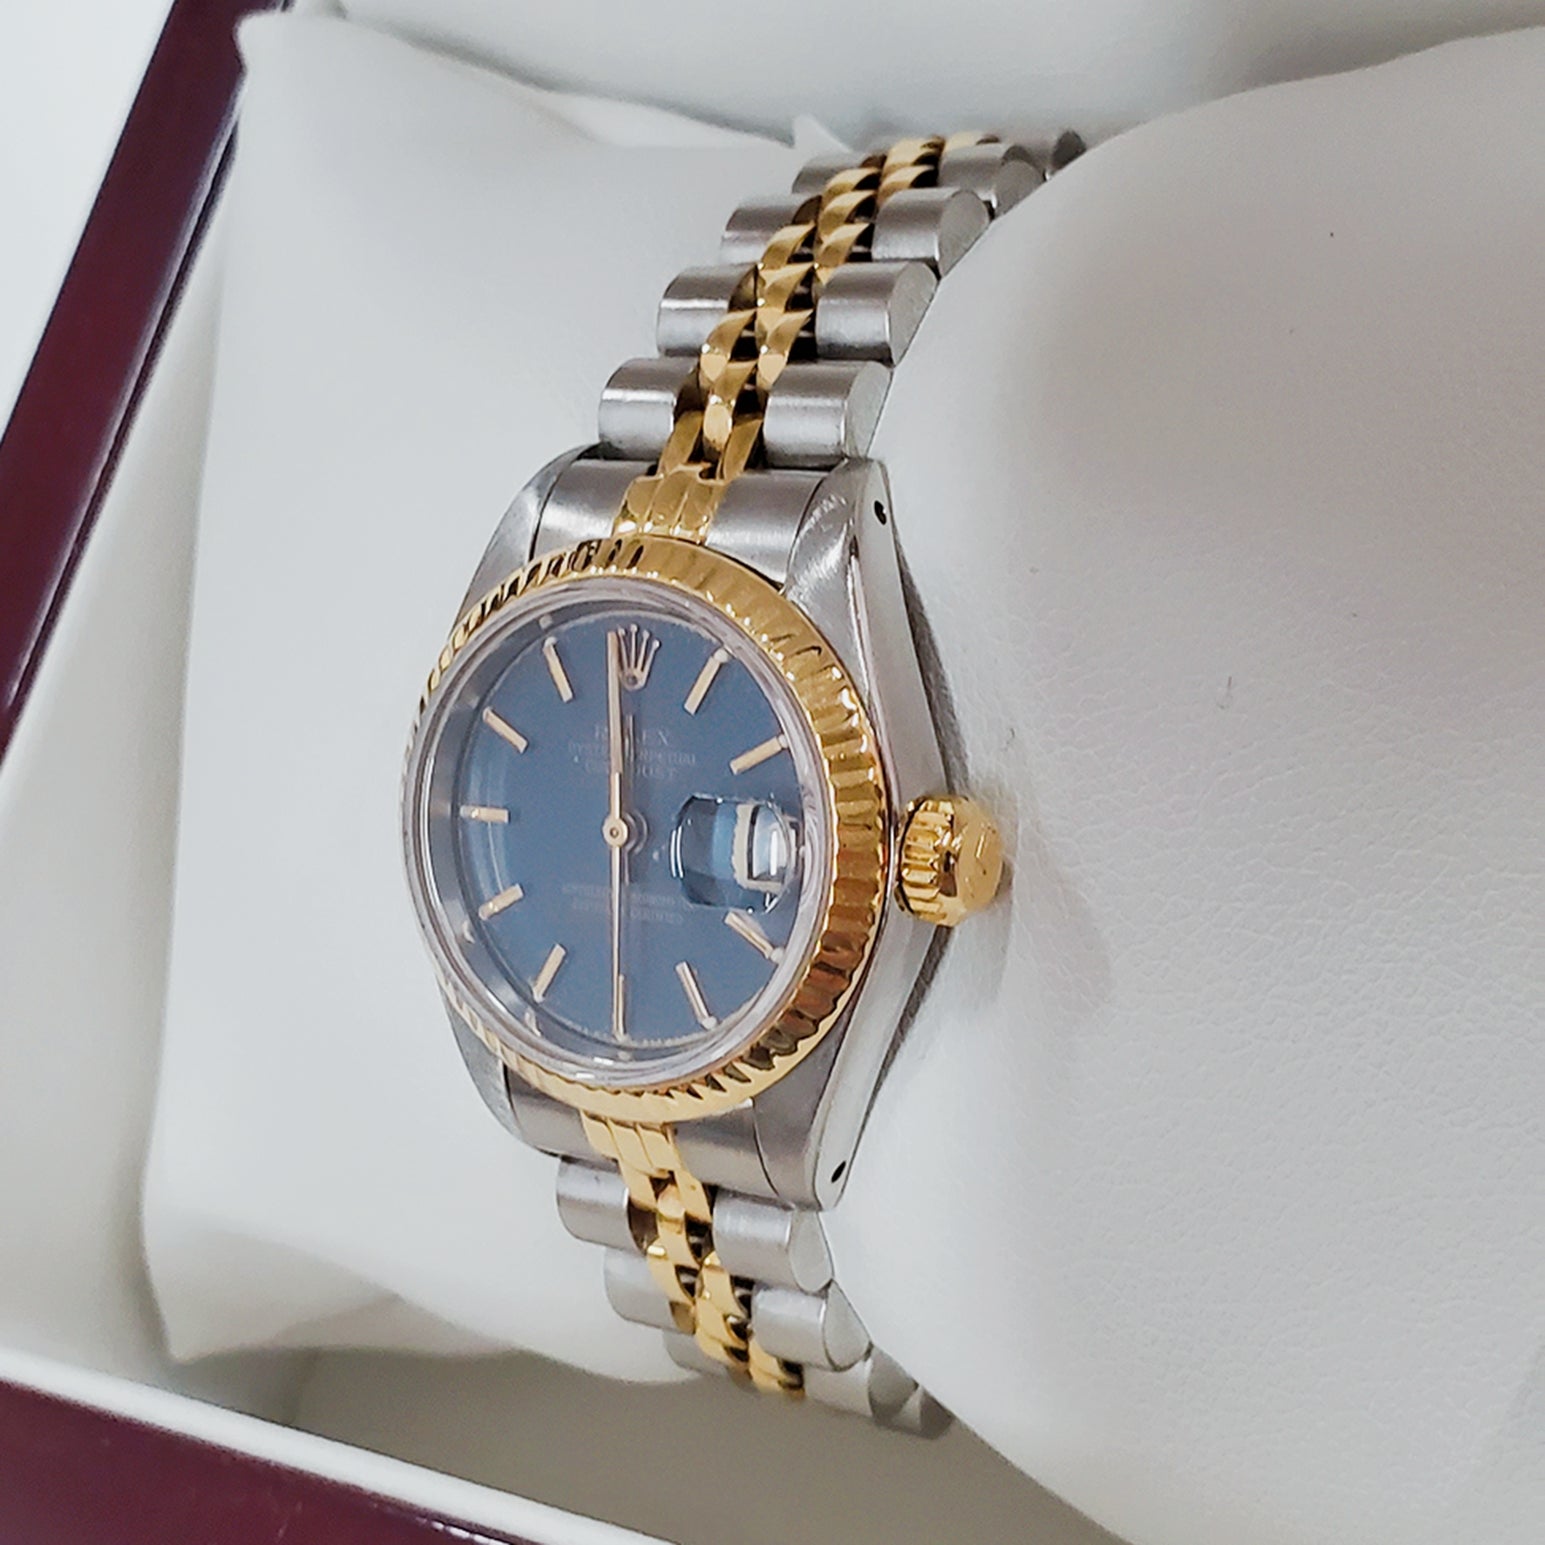 Women's Rolex 26mm Two-Tone DateJust 18K Gold Watch, with Blue Dial, and 18k Fluted Bezel.